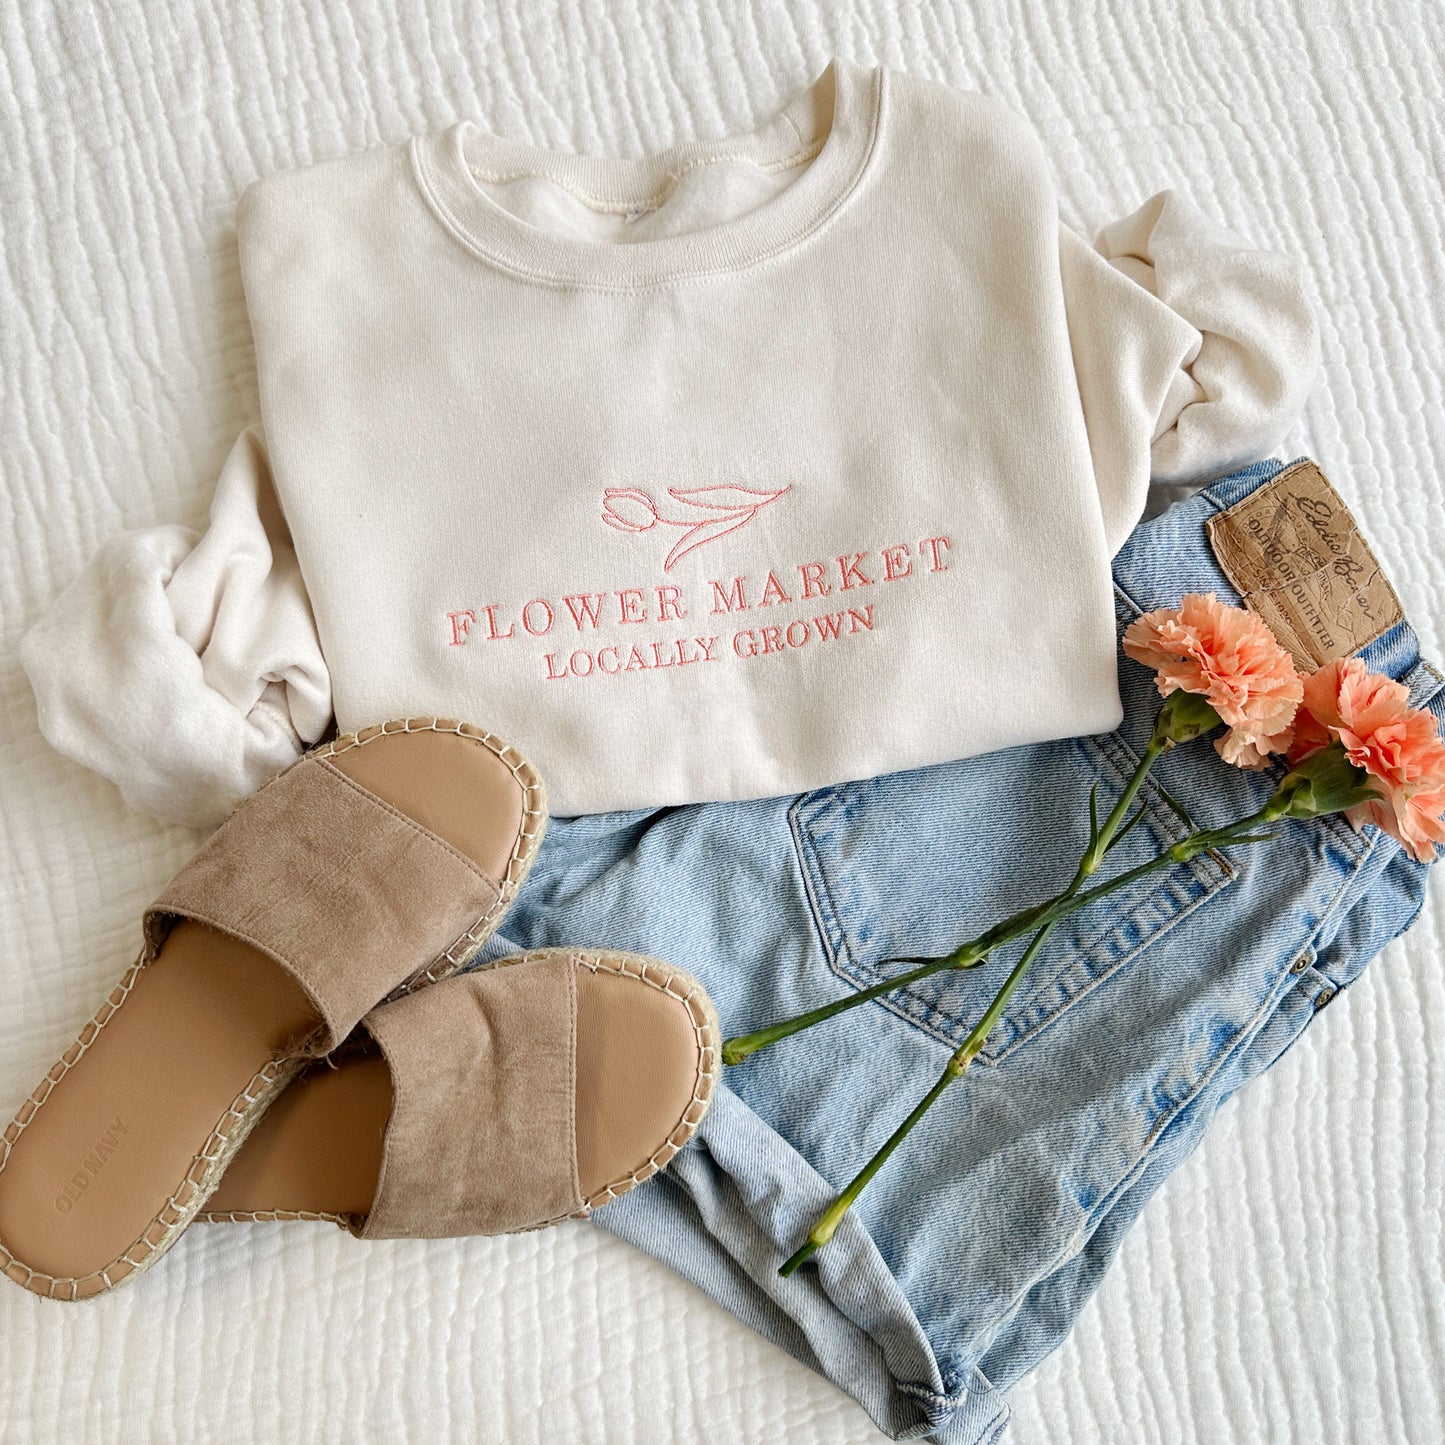 jean shorts, flowers, and sandals styled with a sweet cream crewneck sweatshirt with aflower market and tulip embroidered coral pink design 